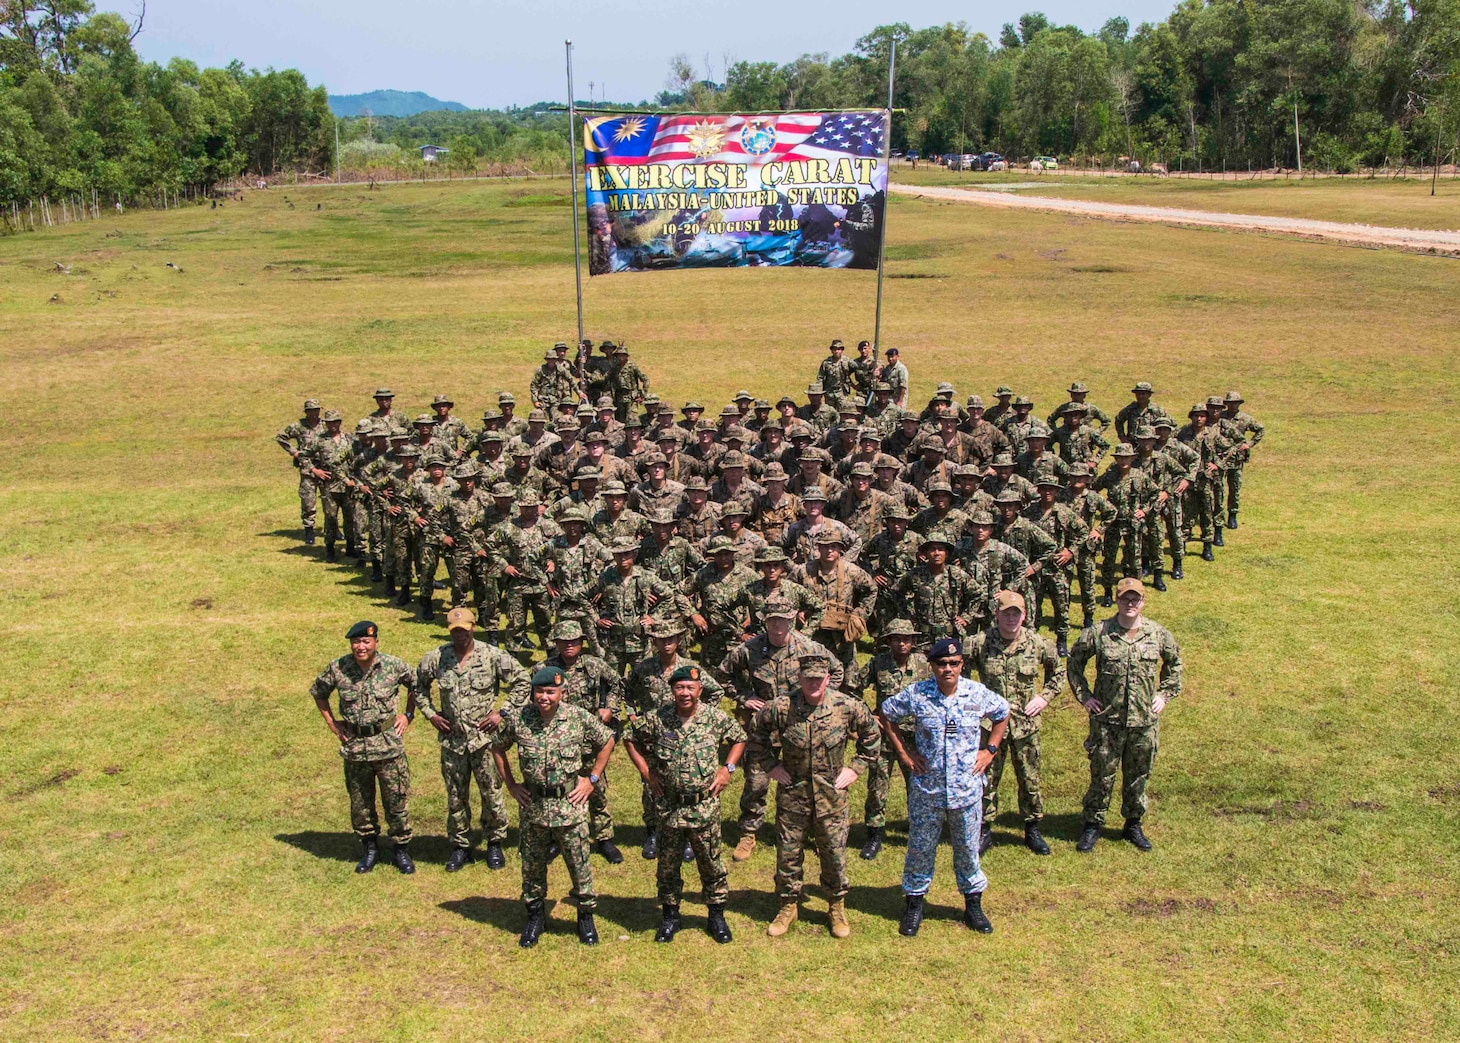 KOTA KINABALU, Malaysia (August 10, 2018) - U.S. Marines stand in formation with Marines from the Royal Malaysian Navy for a photo during the opening ceremony of Cooperation Afloat Readiness and Training (CARAT) Malaysia on Kota Belud Marine Base. CARAT Malaysia in its 24th iteration, is designed to enhance information sharing and coordination, build mutual warfighting capability and support long-term regional cooperation enabling both partner armed forces to operate effectively together as a unified maritime force.